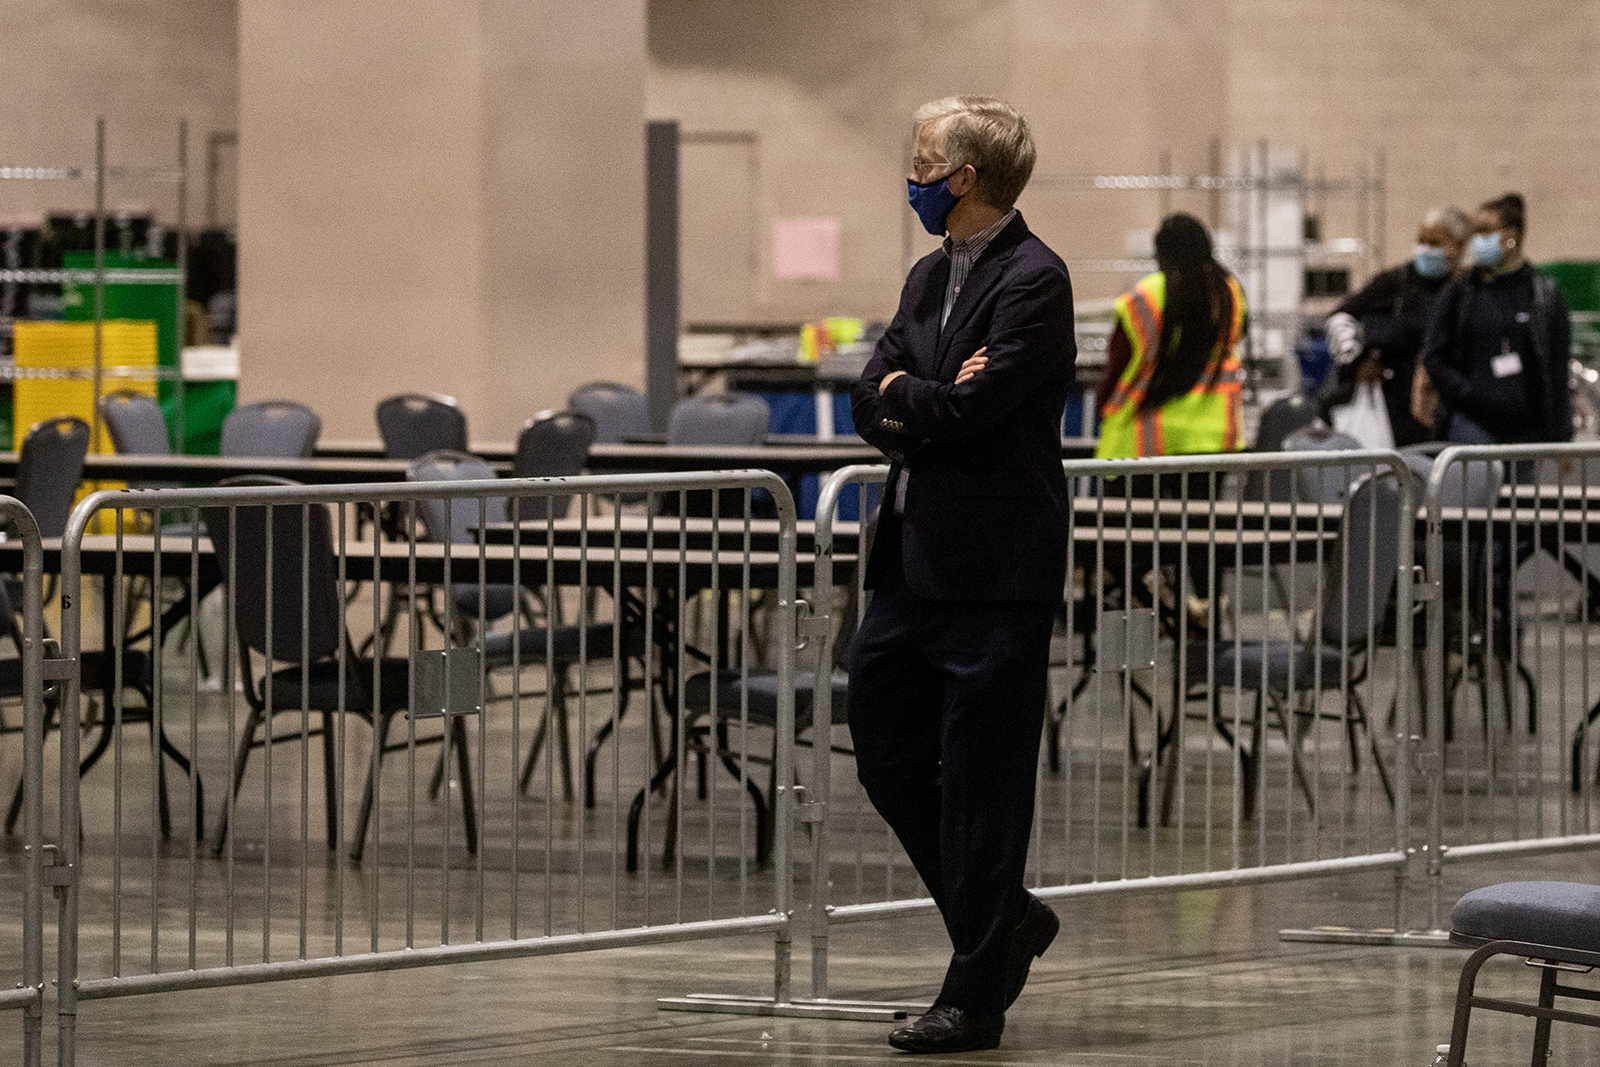 A man watches on from the observers area as election workers count ballots at the Philadelphia Convention Center on November 6, in Philadelphia, Pennsylvania. 